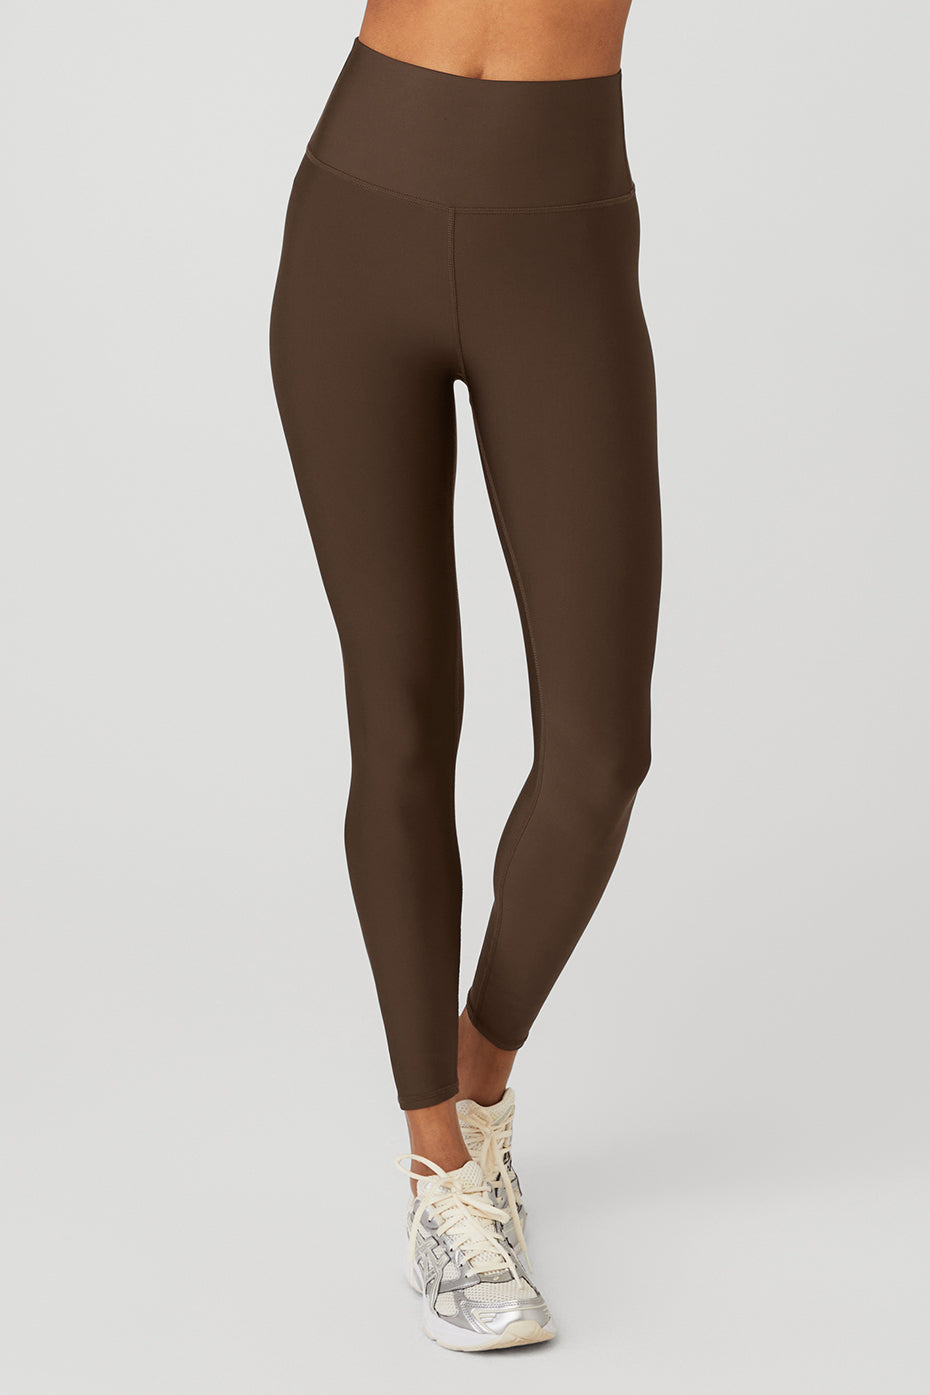 alo High Waisted Airlift Legging in Espresso